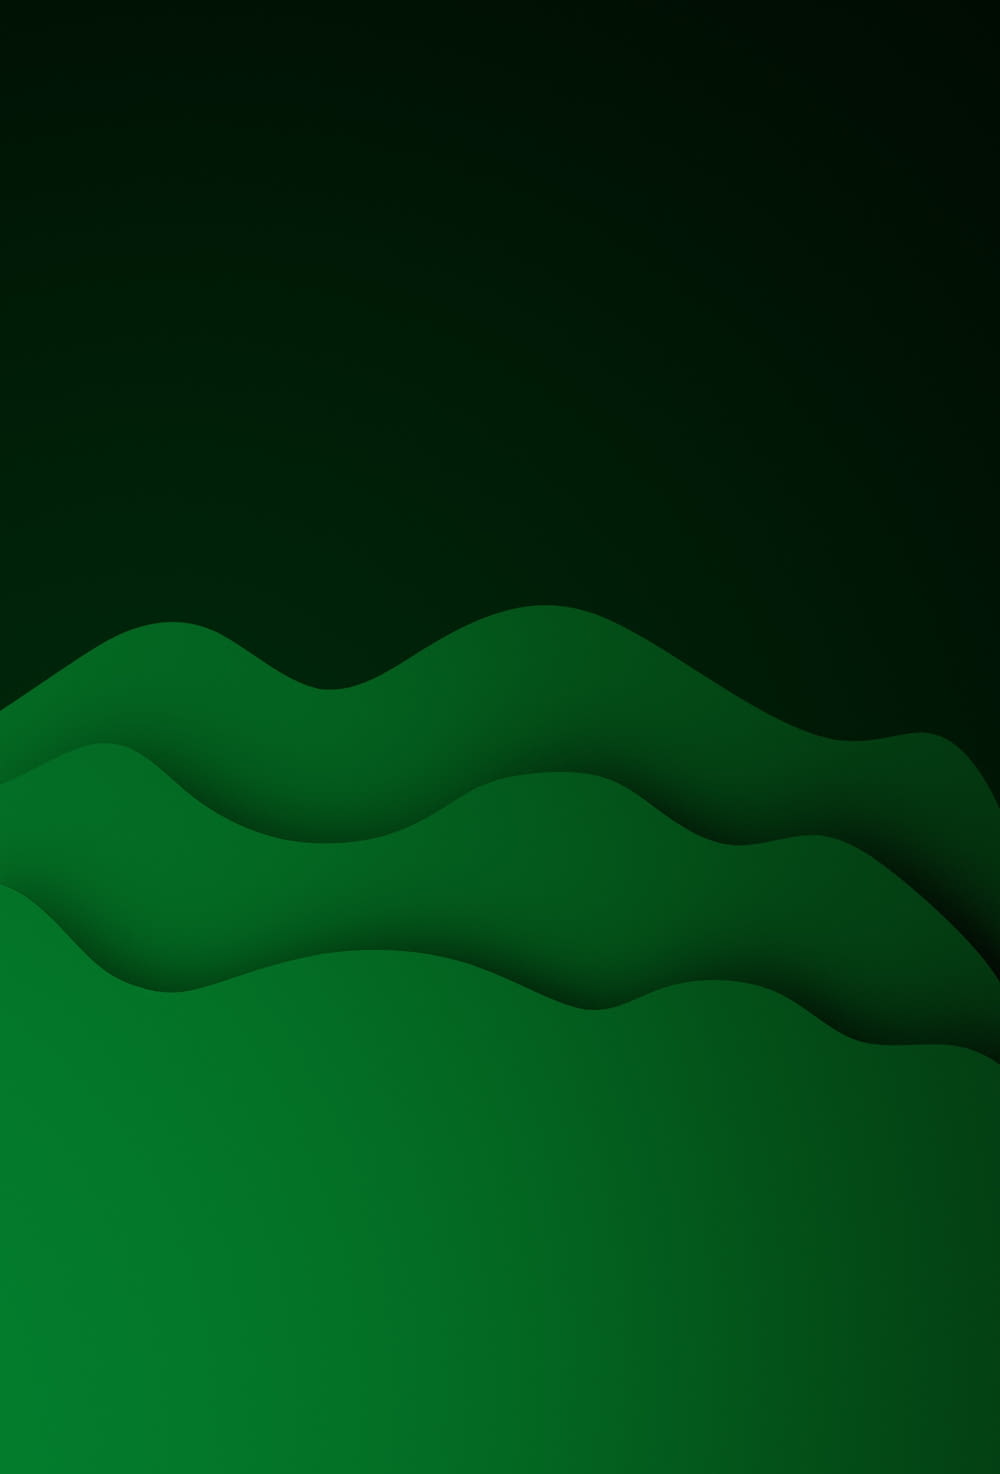 a green abstract background with wavy shapes